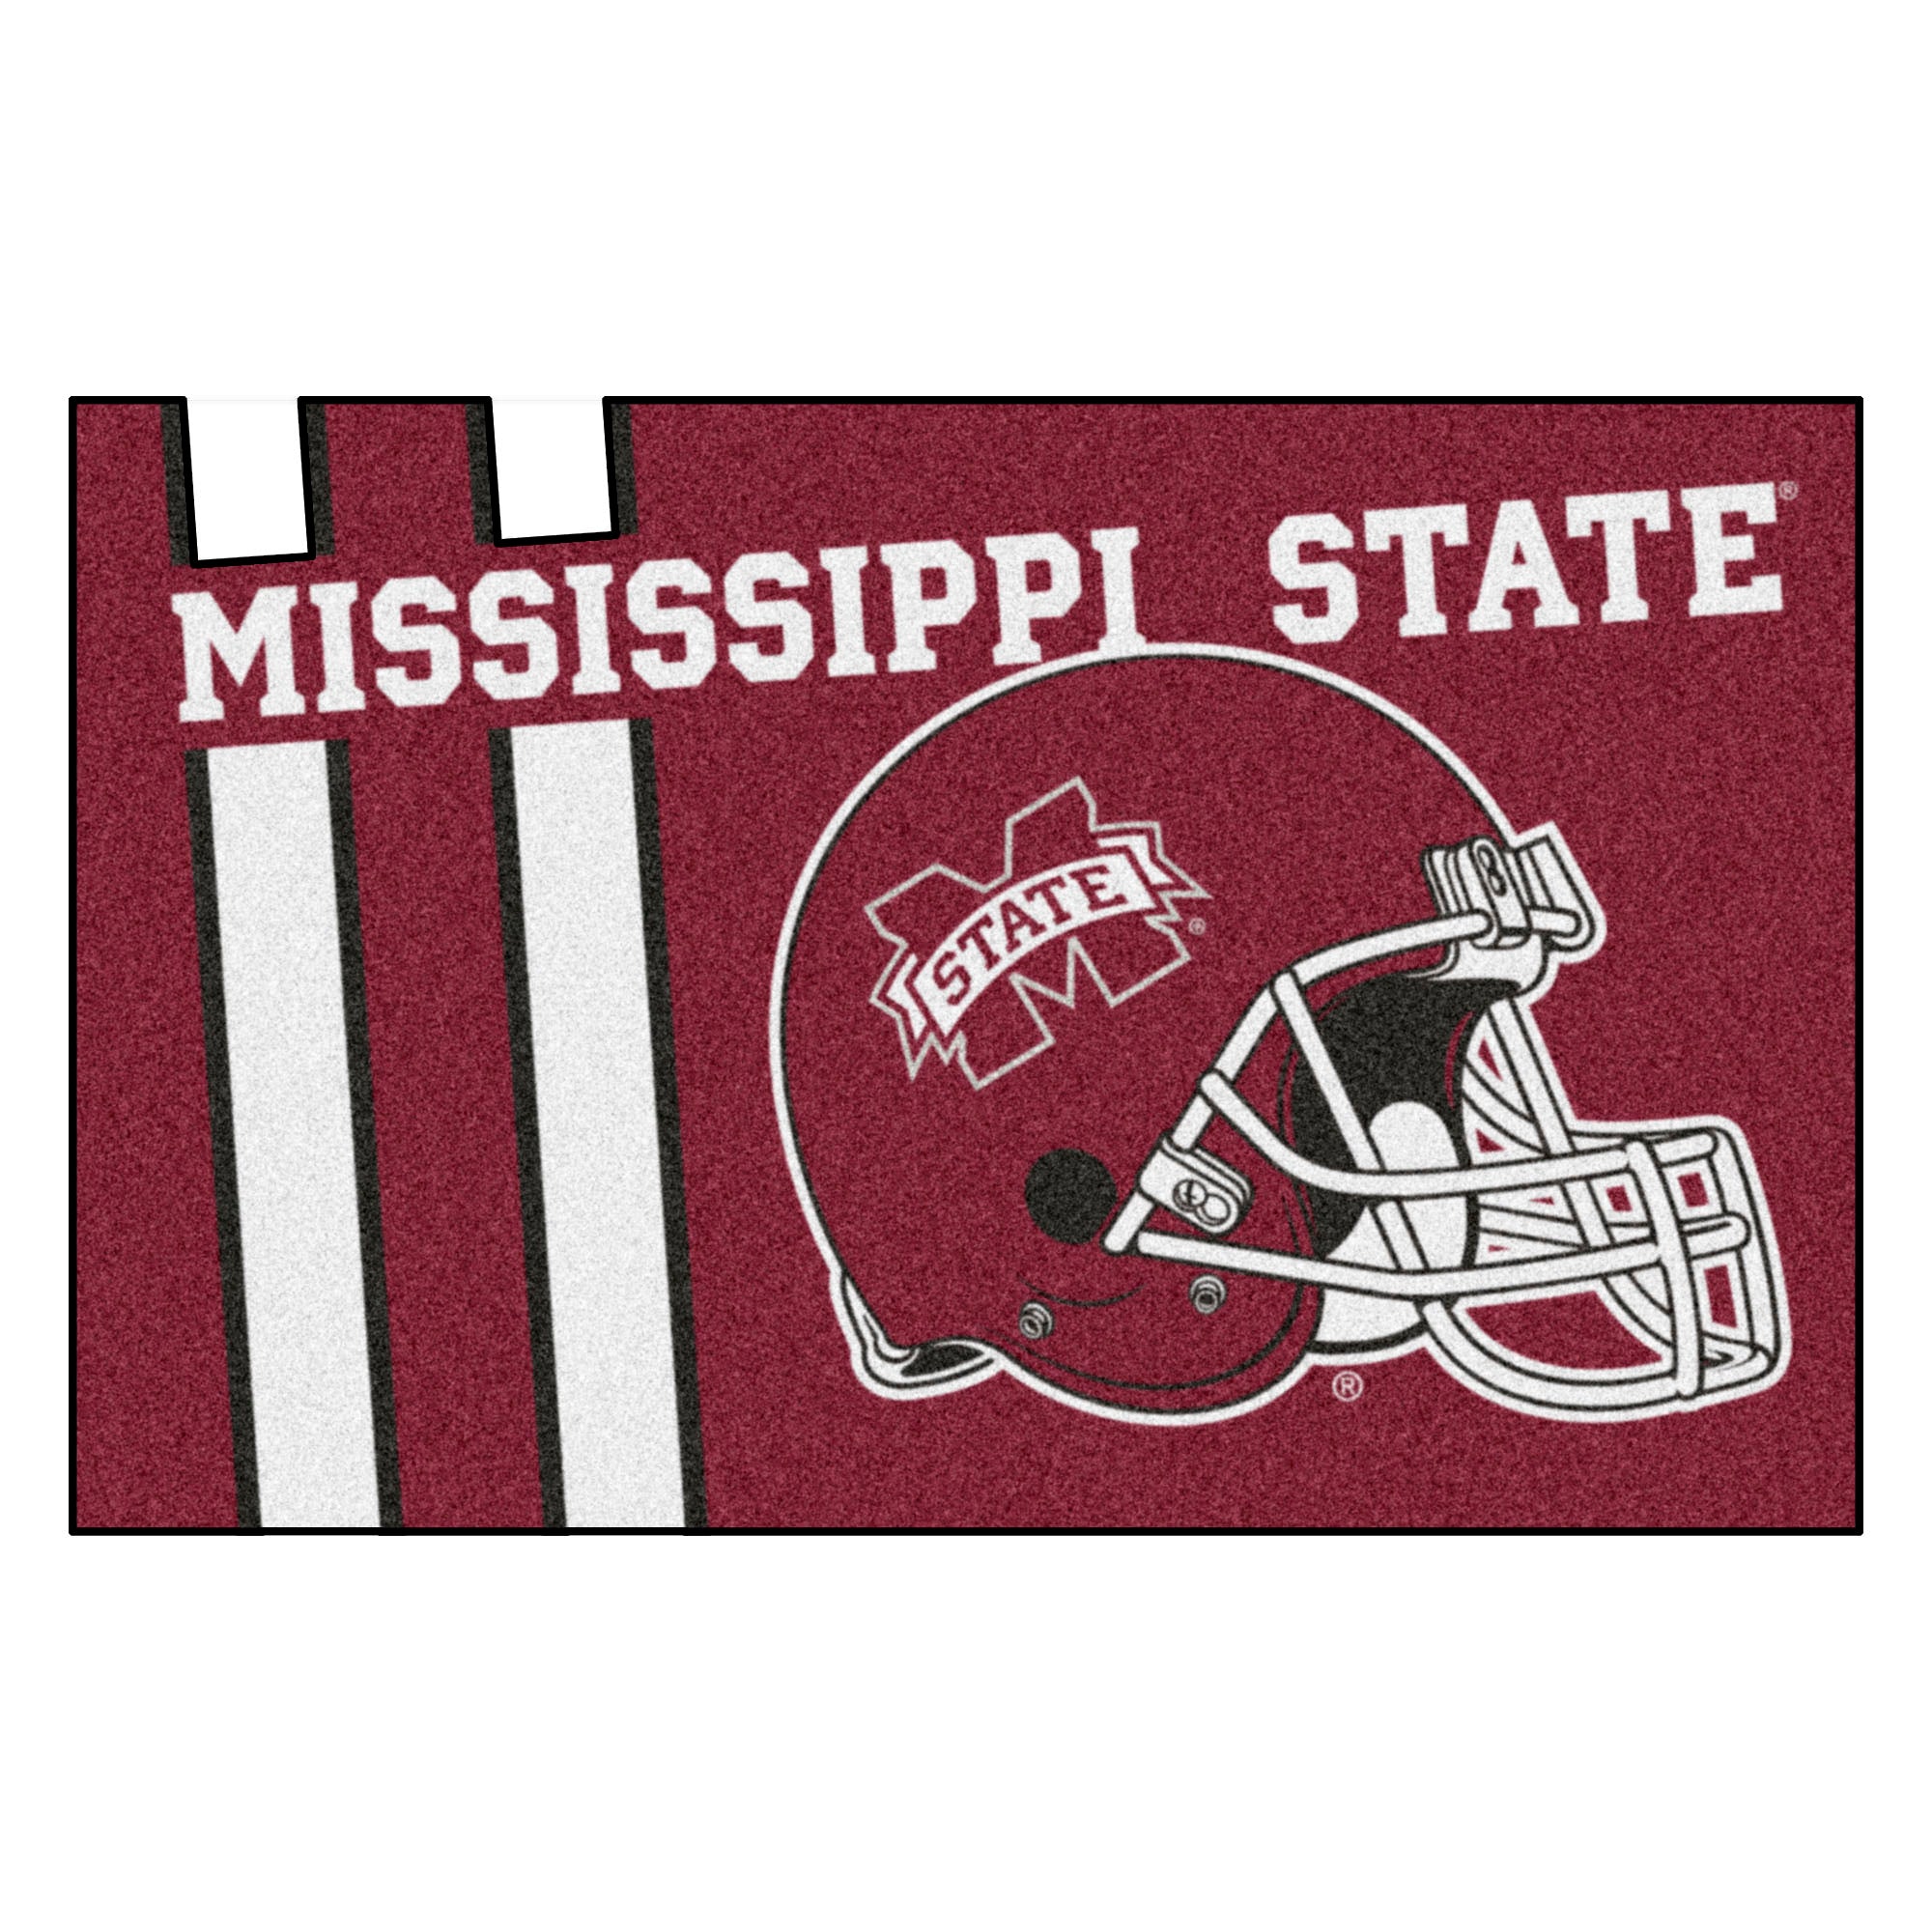 FANMATS, Mississippi State University Uniform Rug - 19in. x 30in.